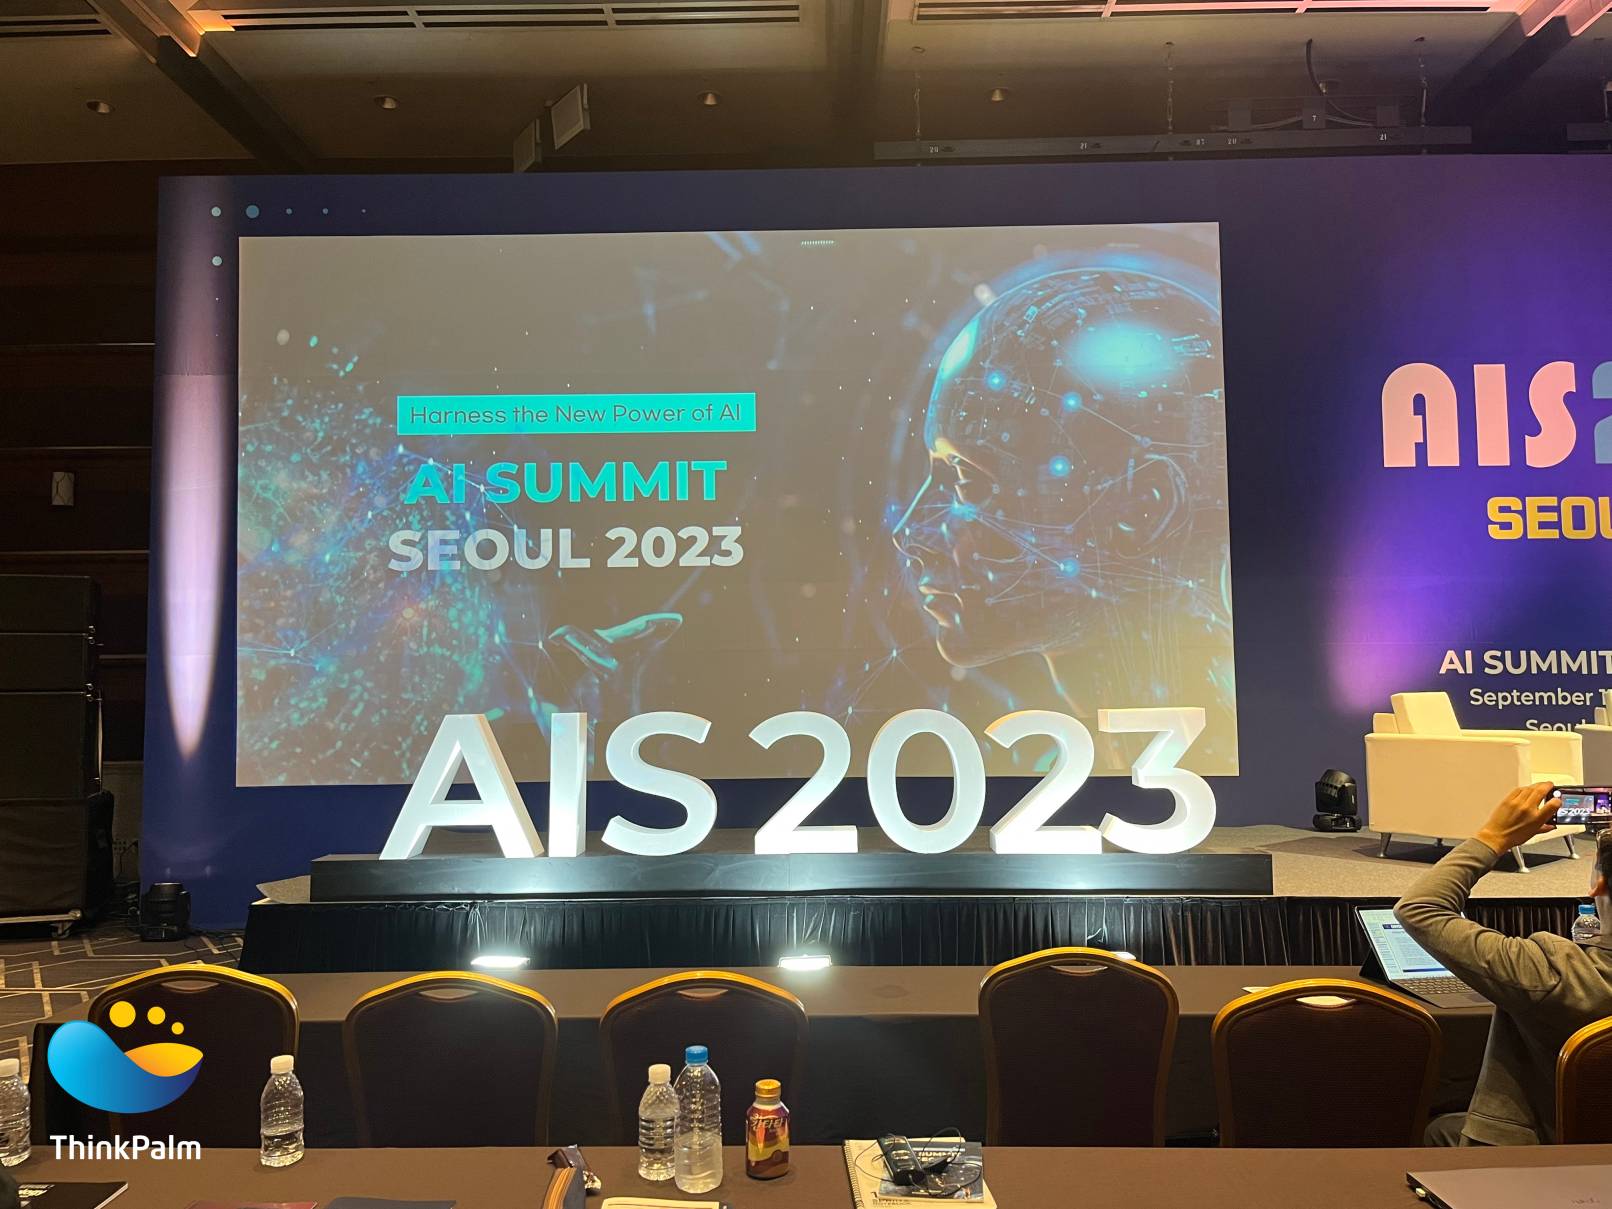 ThinkPalm attended AI Summit in Seoul 2023